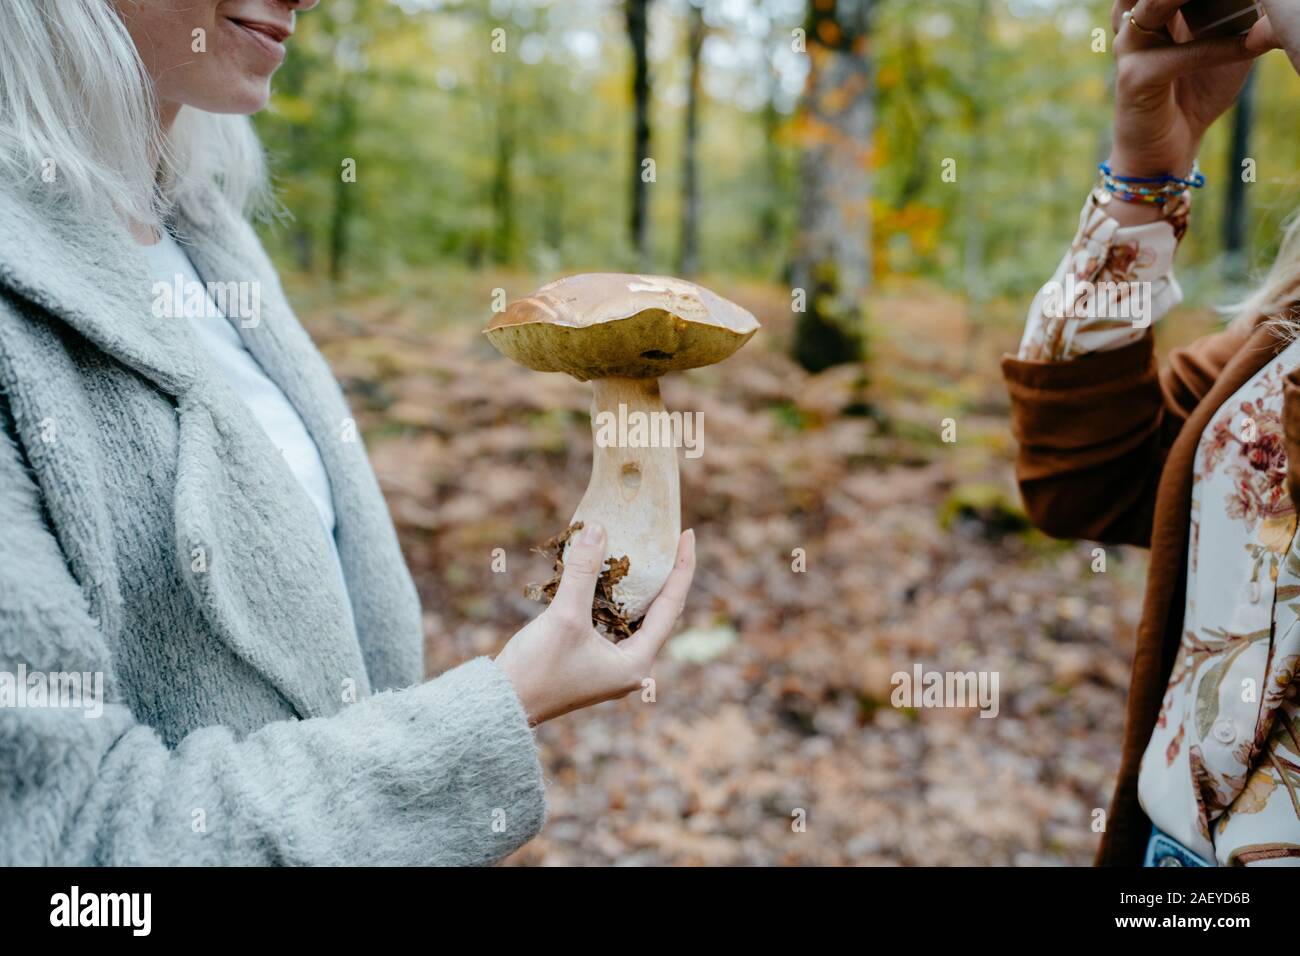 Young Women taking pictures of a giant mushroom in a forest Stock Photo